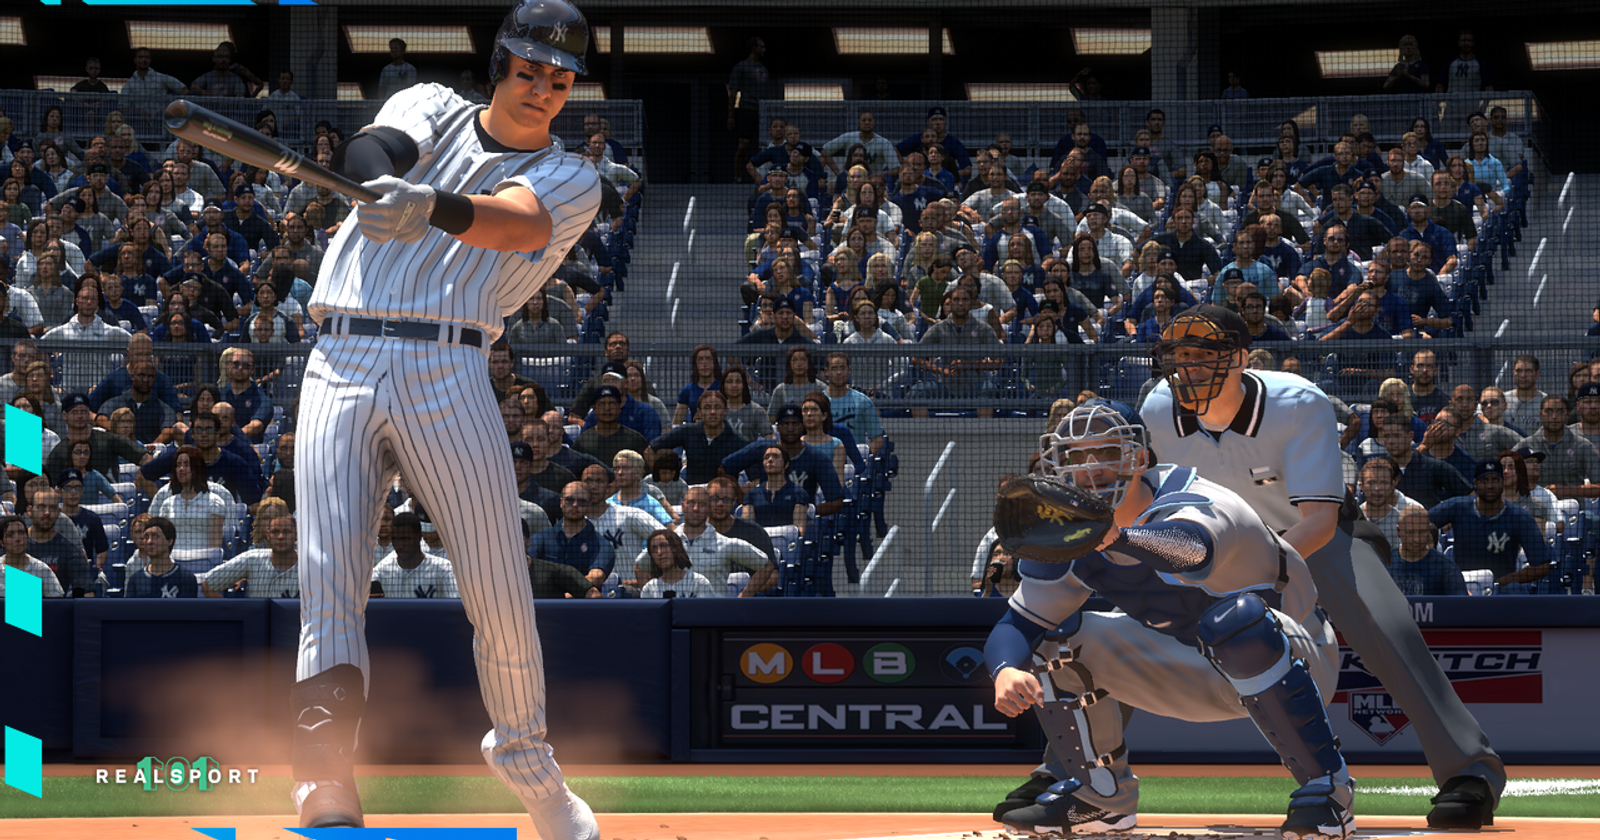 Derek Jeter will be on the cover of MLB The Show 22 (Deluxe Edition)! You  can see the cover design on my story! #LGY